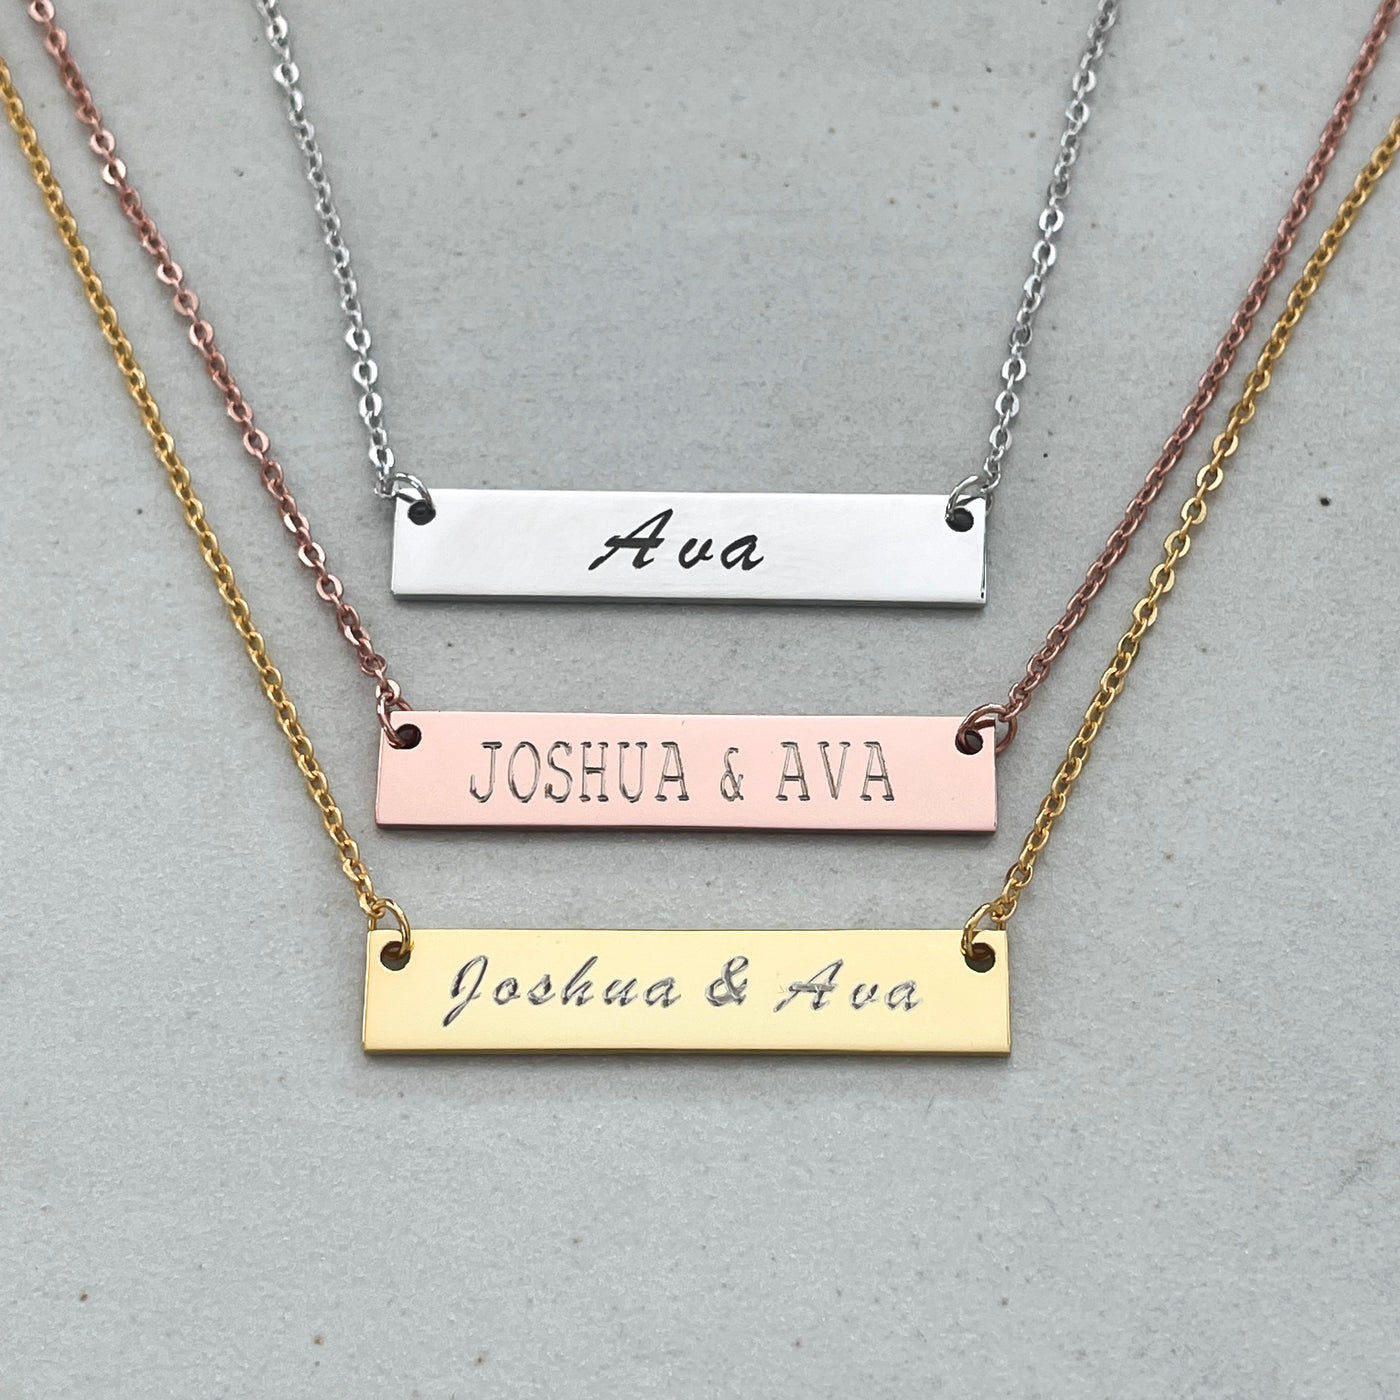 PERSONALIZED NAME BAR NECKLACE - SILVER, GOLD & ROSE GOLD | FOREVER IMPRINT JEWELLERY